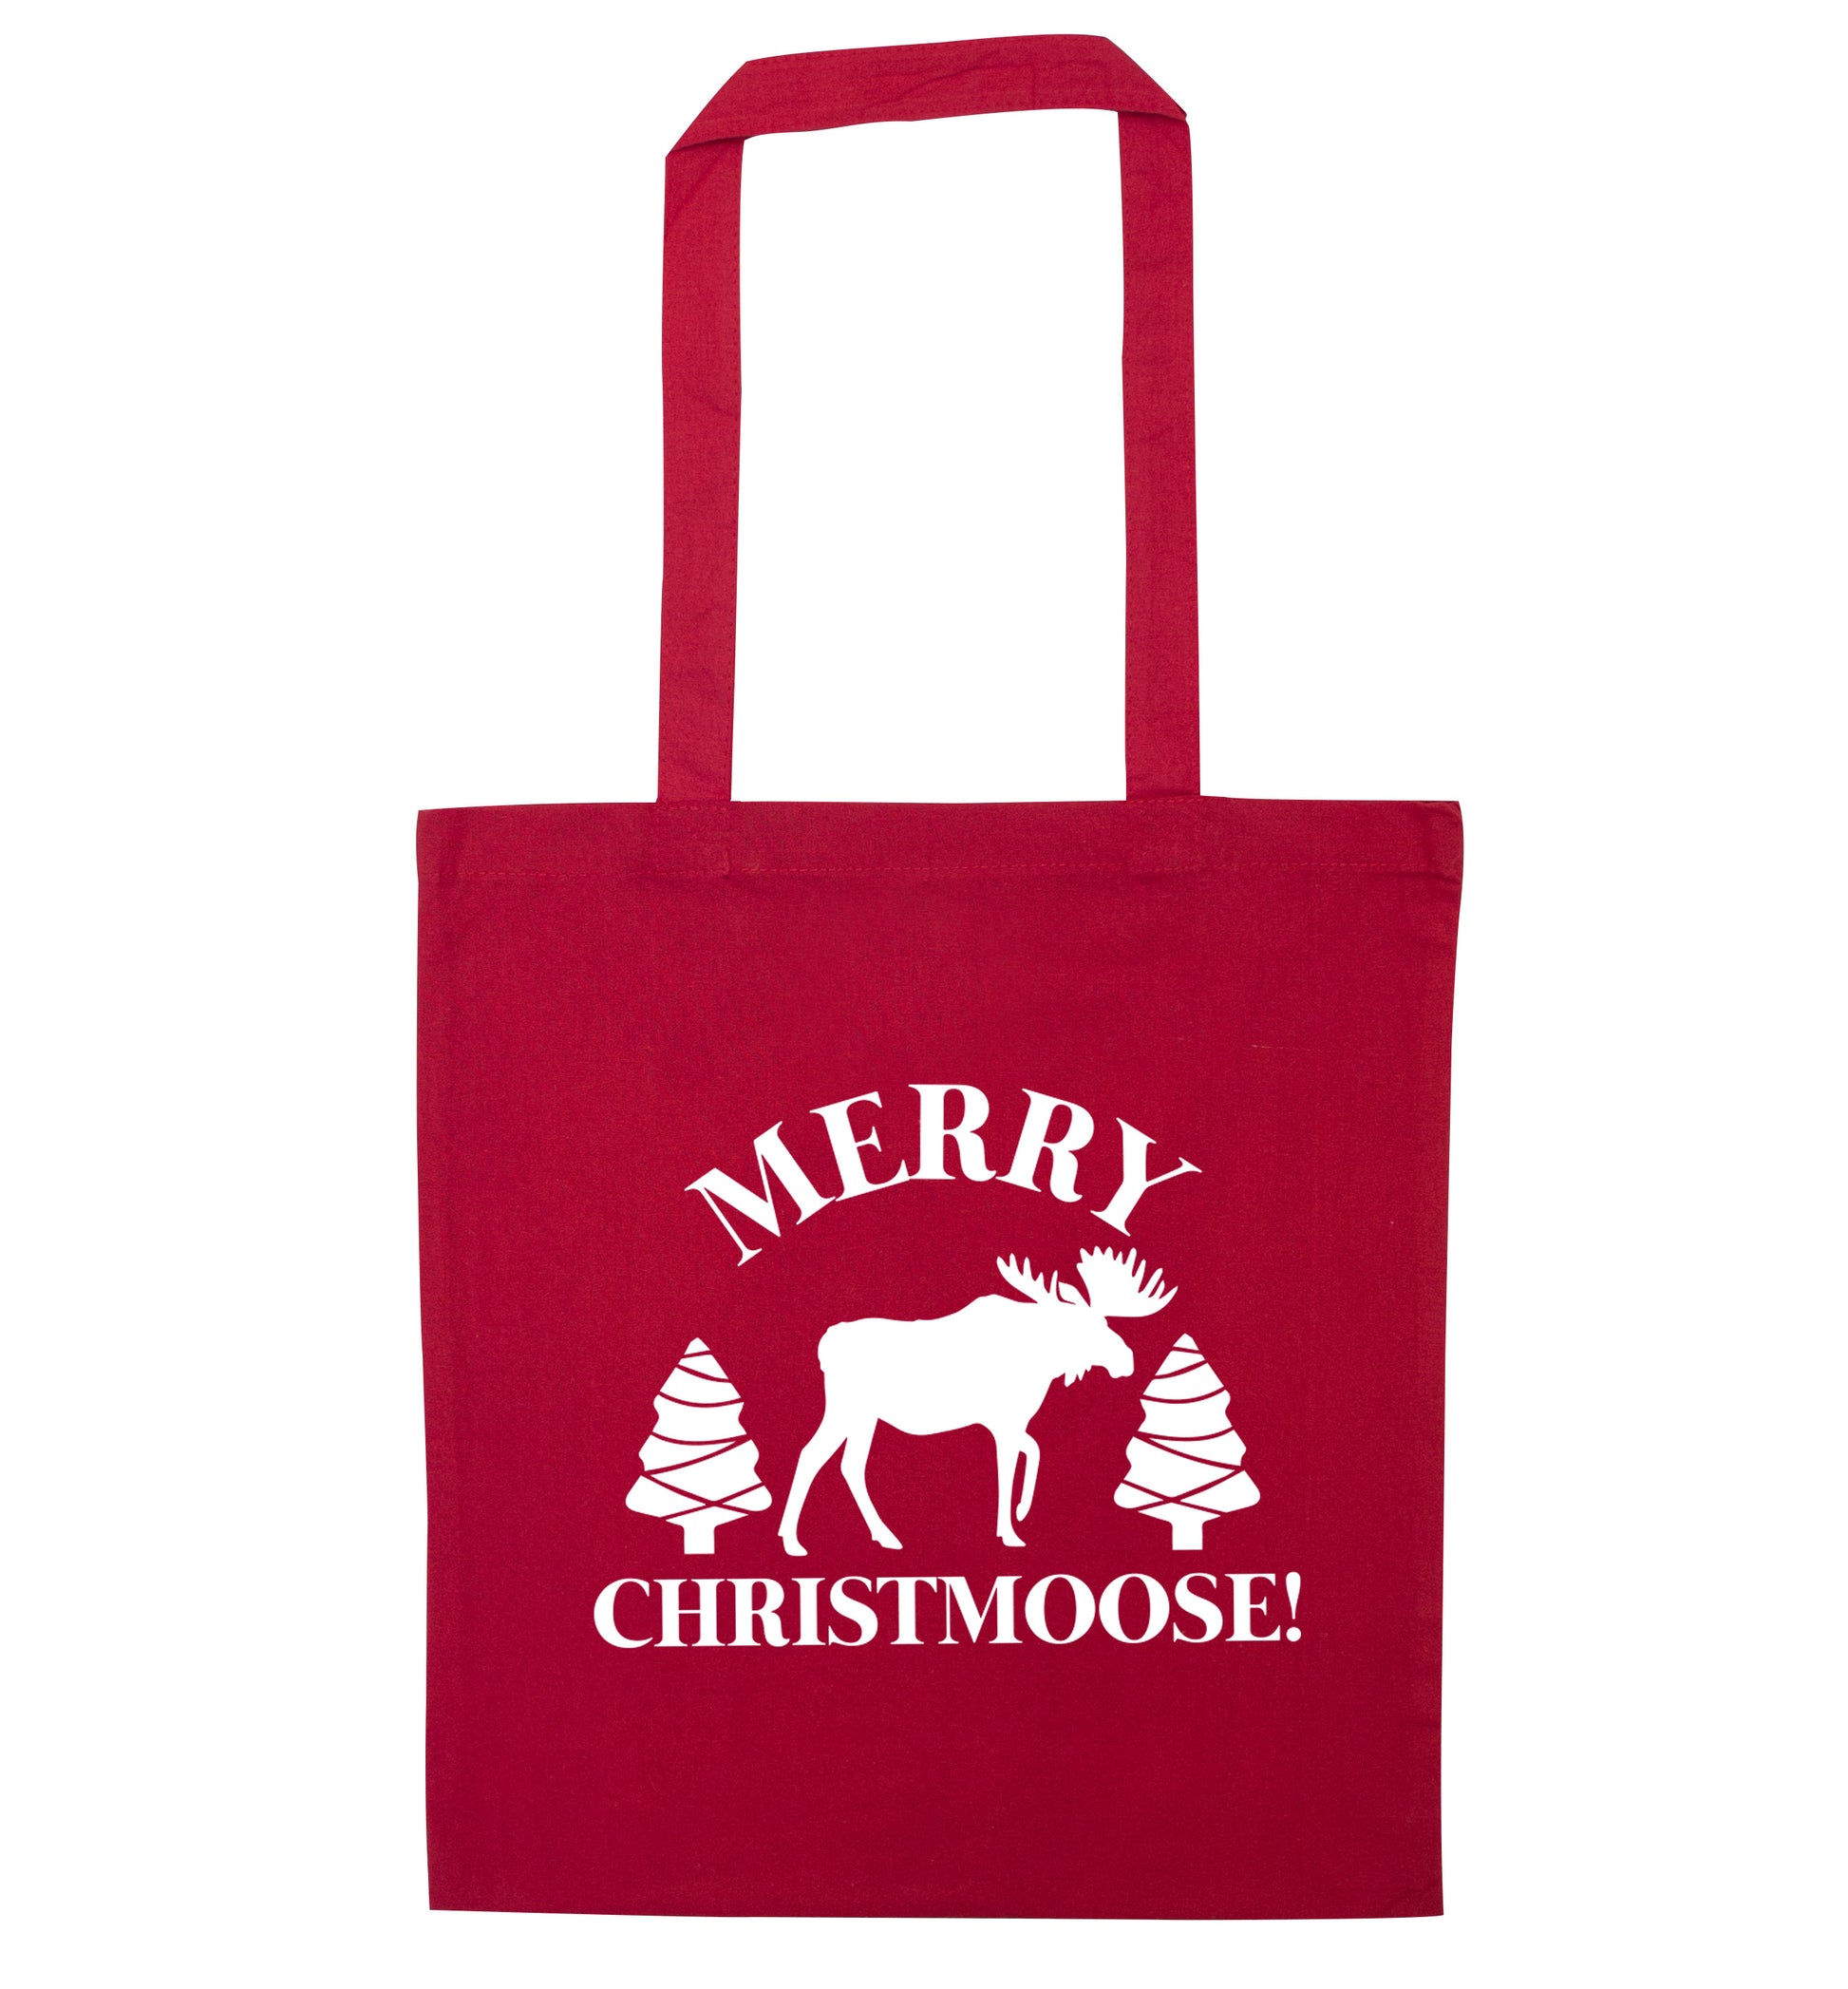 Merry Christmoose red tote bag